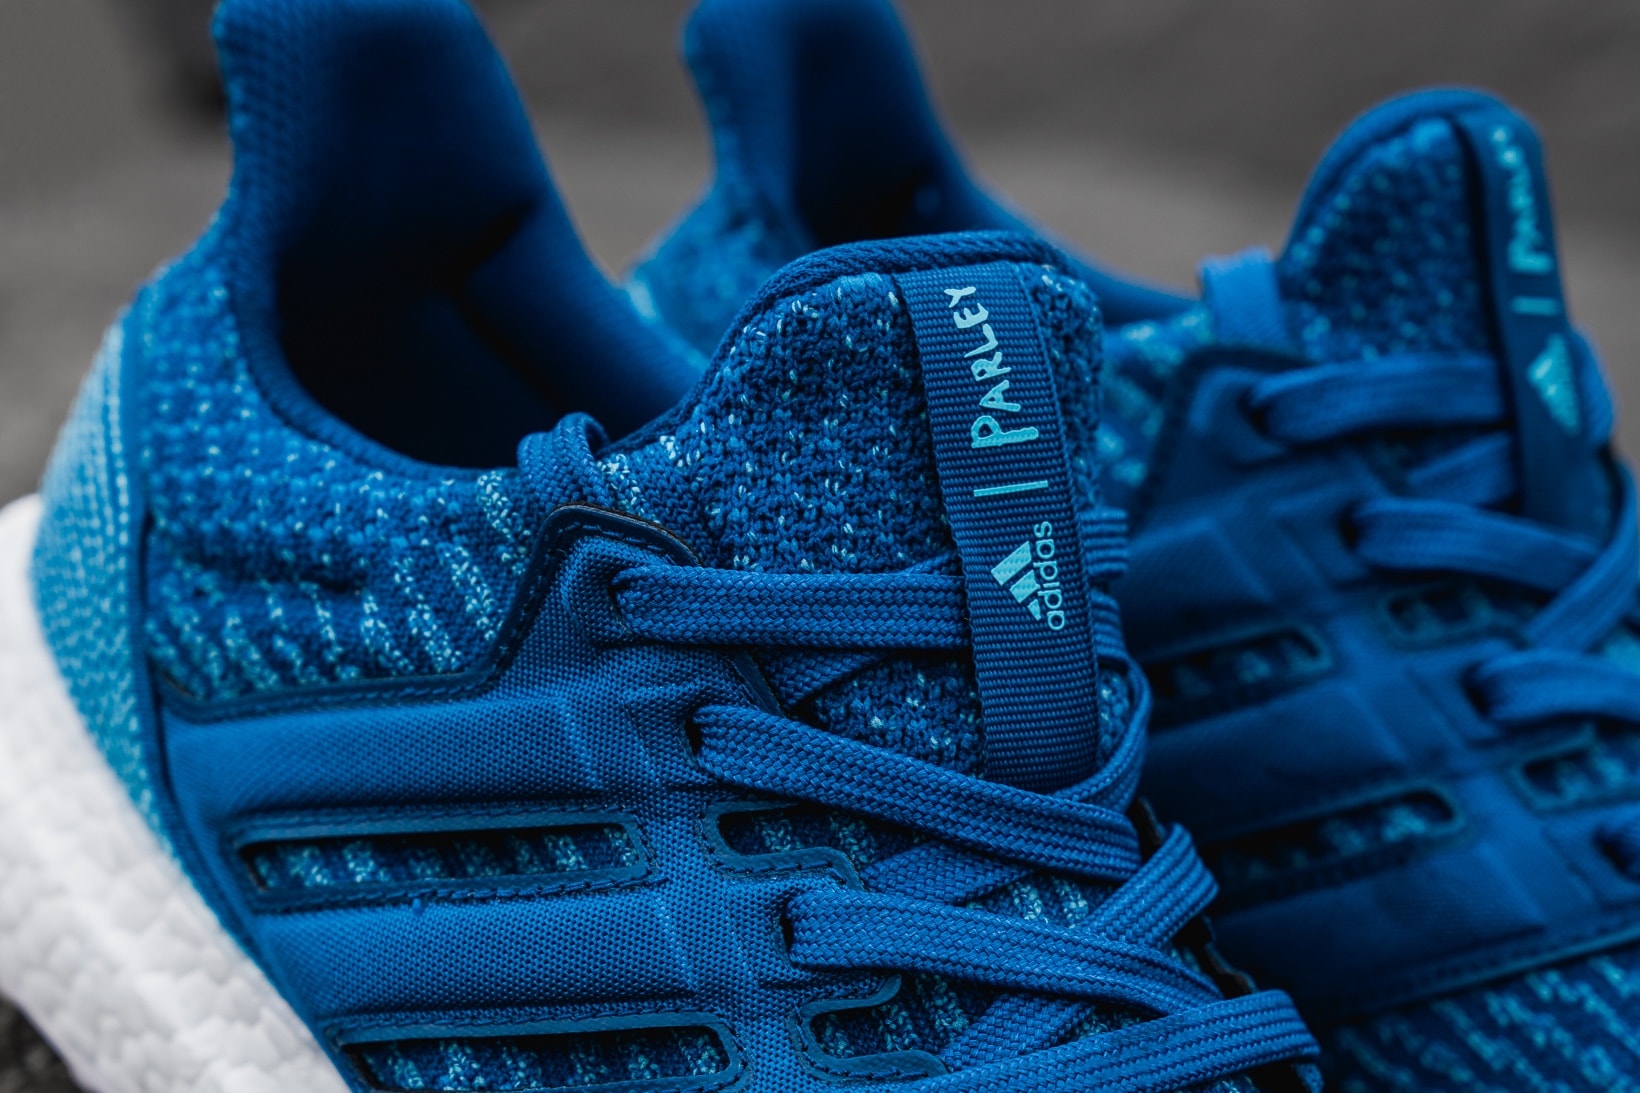 adidas x Parley for the Oceans UltraBOOST 3.0 Closer Look